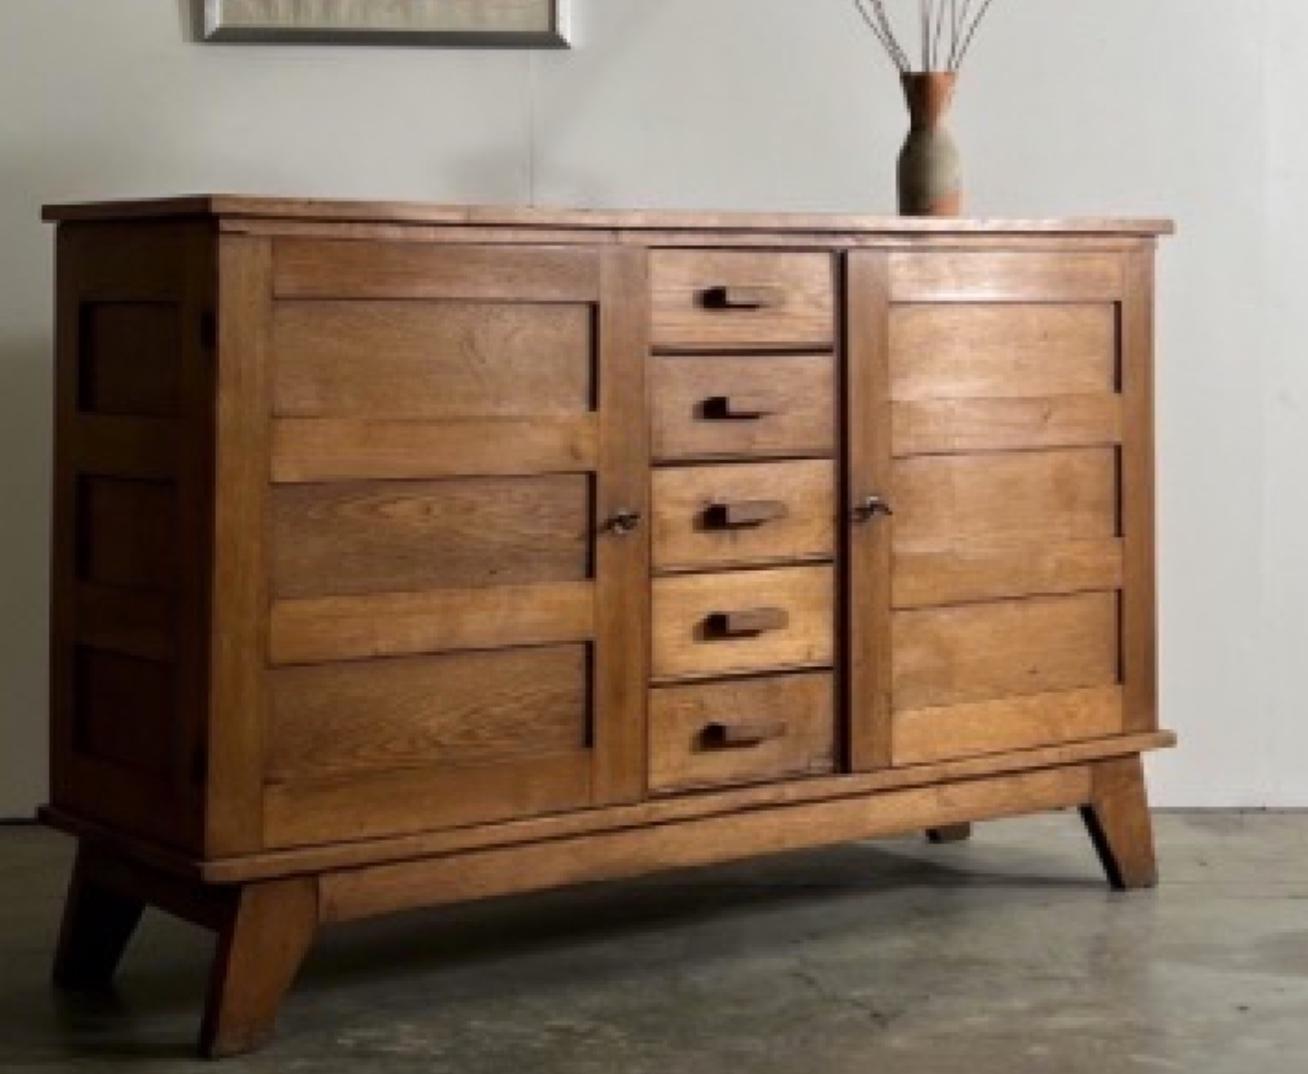 French reconstruction period oak sideboard by Rene Gabriel. A handsome piece with great simple lines and exceptional storage capacity. A central column of five wood drawers with wood block handles is flanked by two paneled cabinet doors, giving the